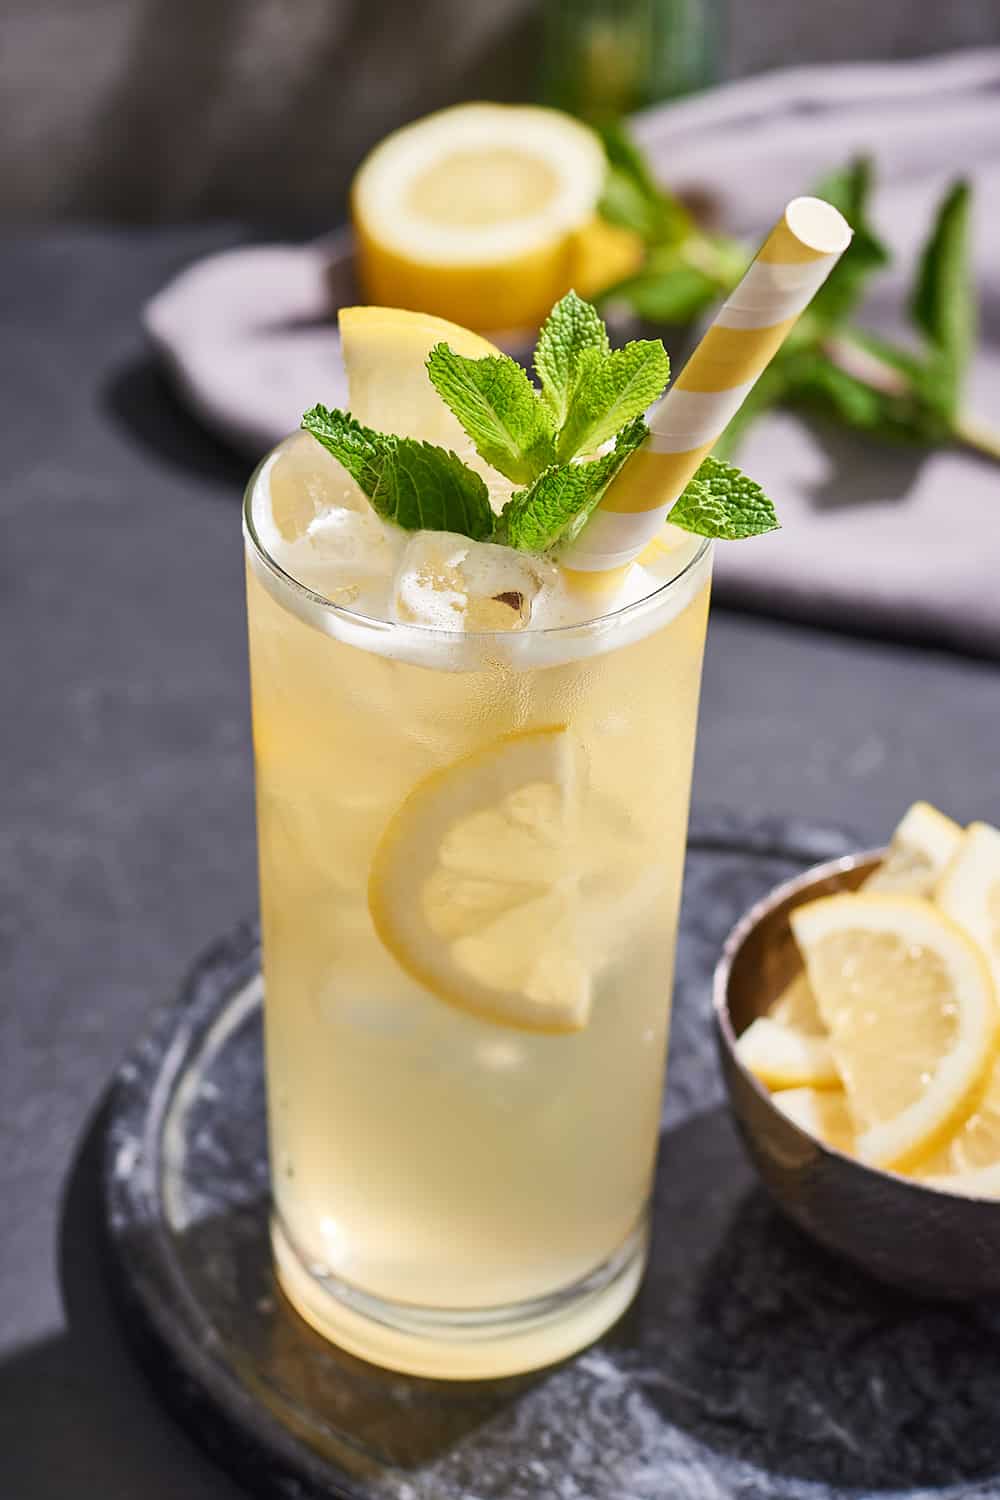 Homemade lemonade is a drink that so many people love